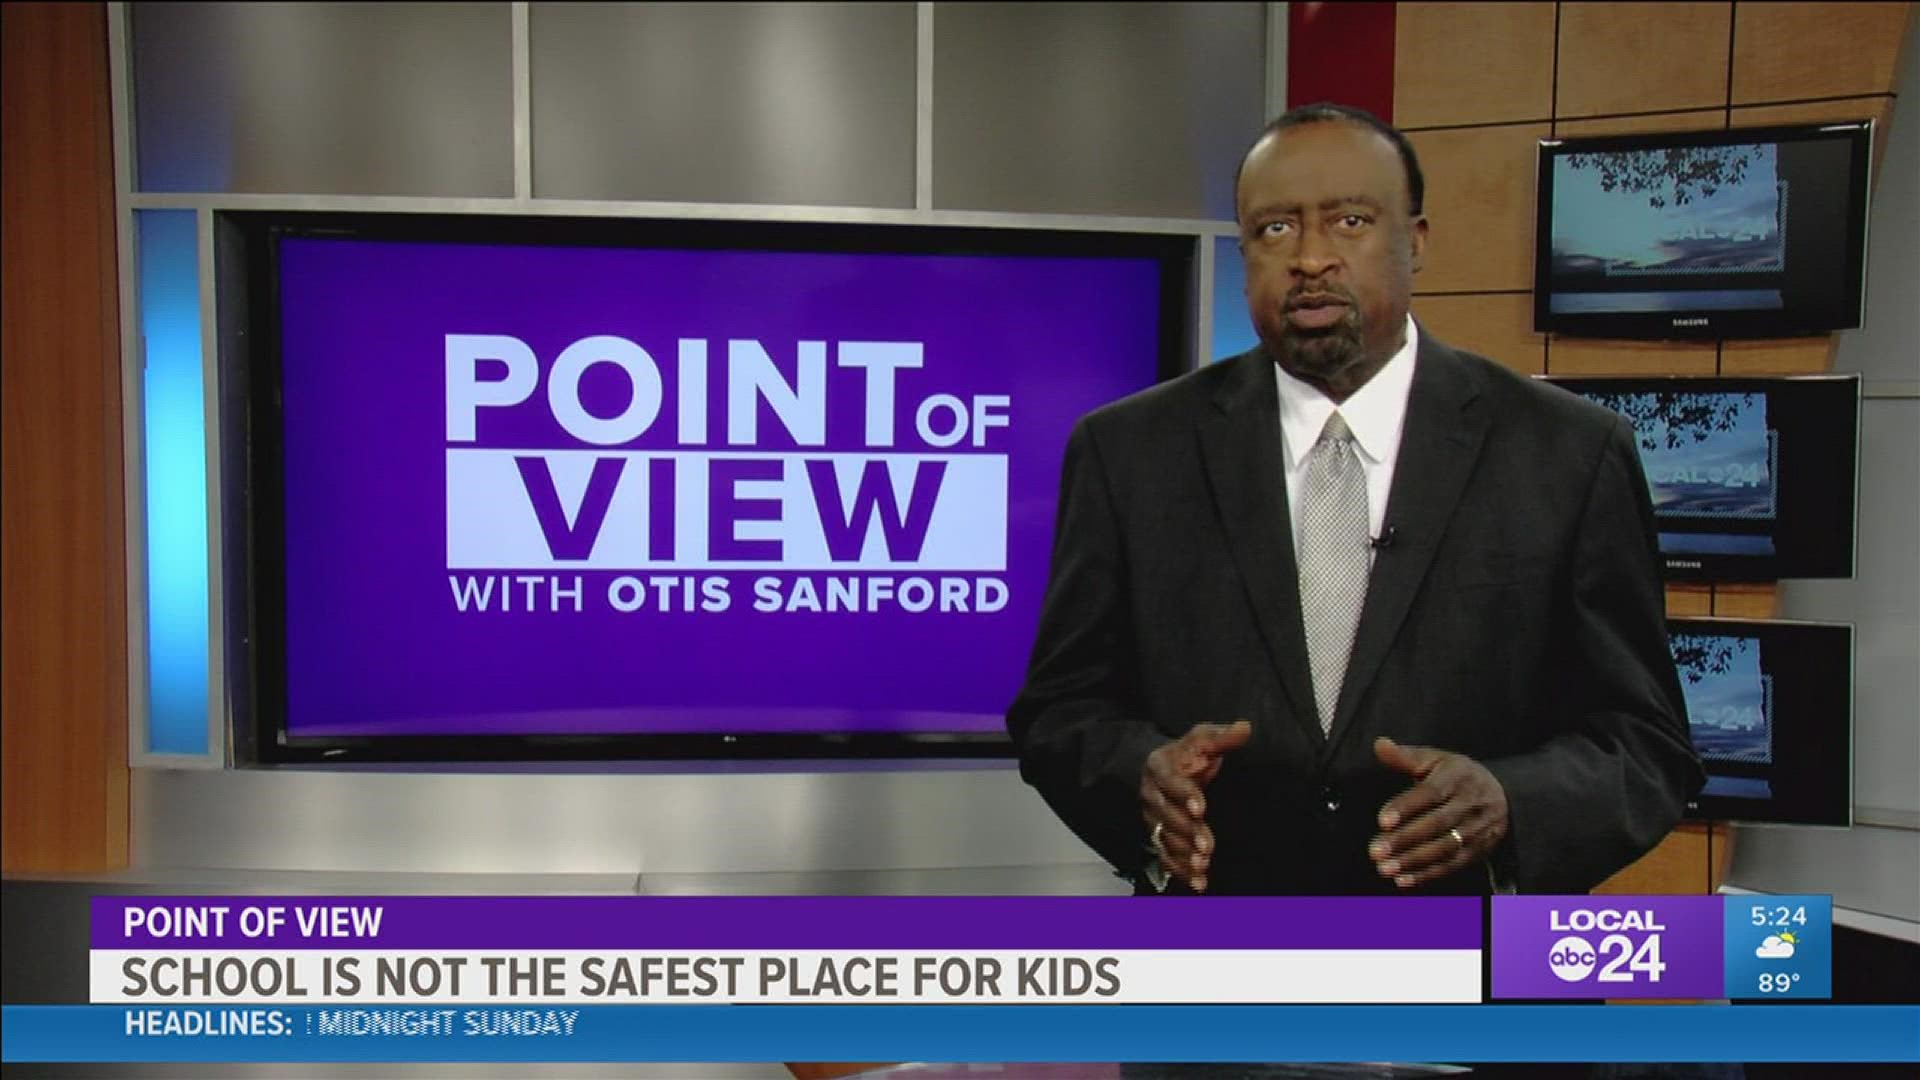 "If our children are going to be protected from rising cases, it will be up to us and the courts, rather than politicians..." said Local 24 commentator Otis Sanford.